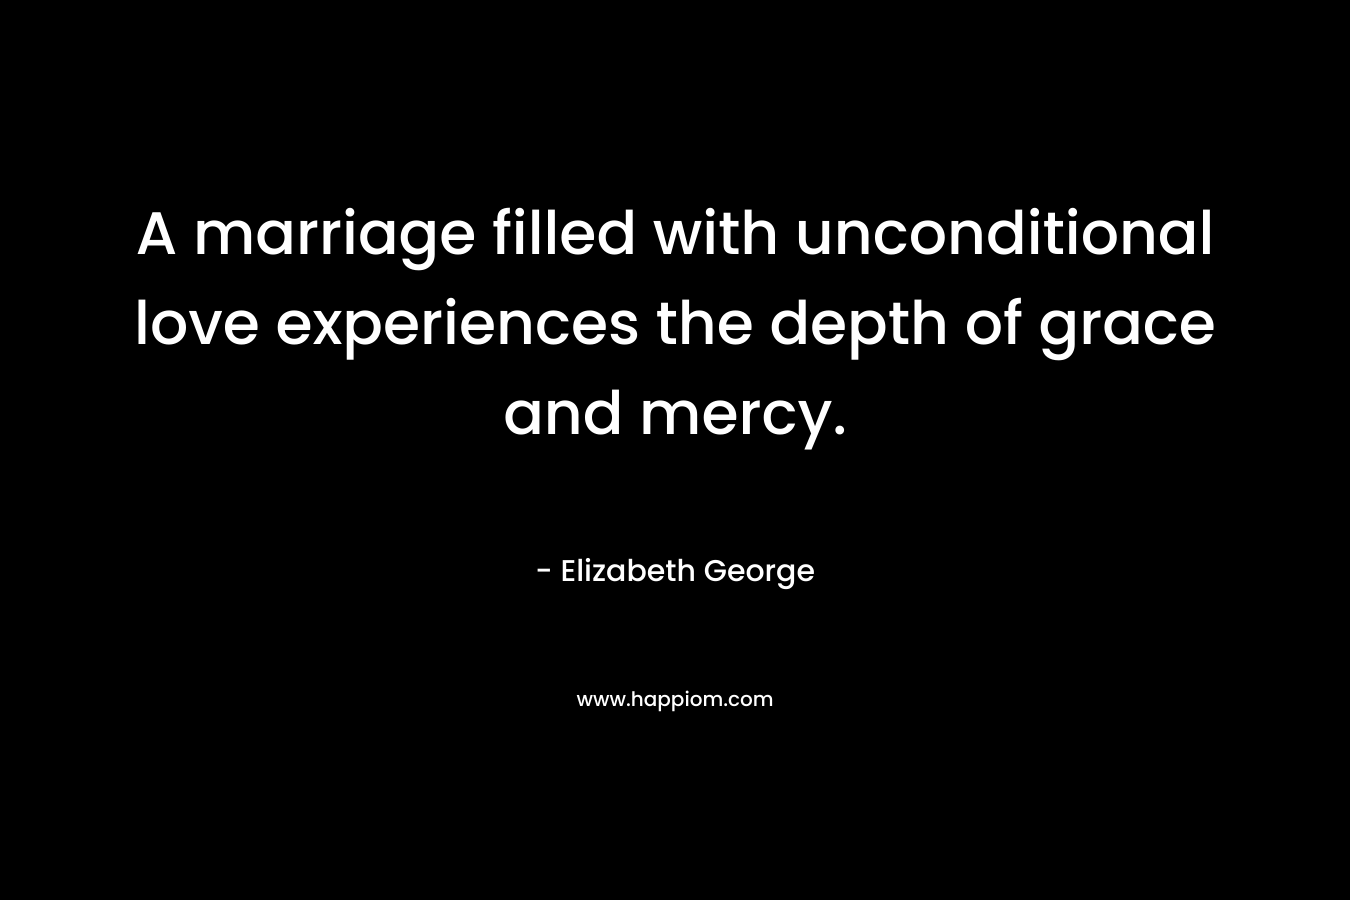 A marriage filled with unconditional love experiences the depth of grace and mercy.